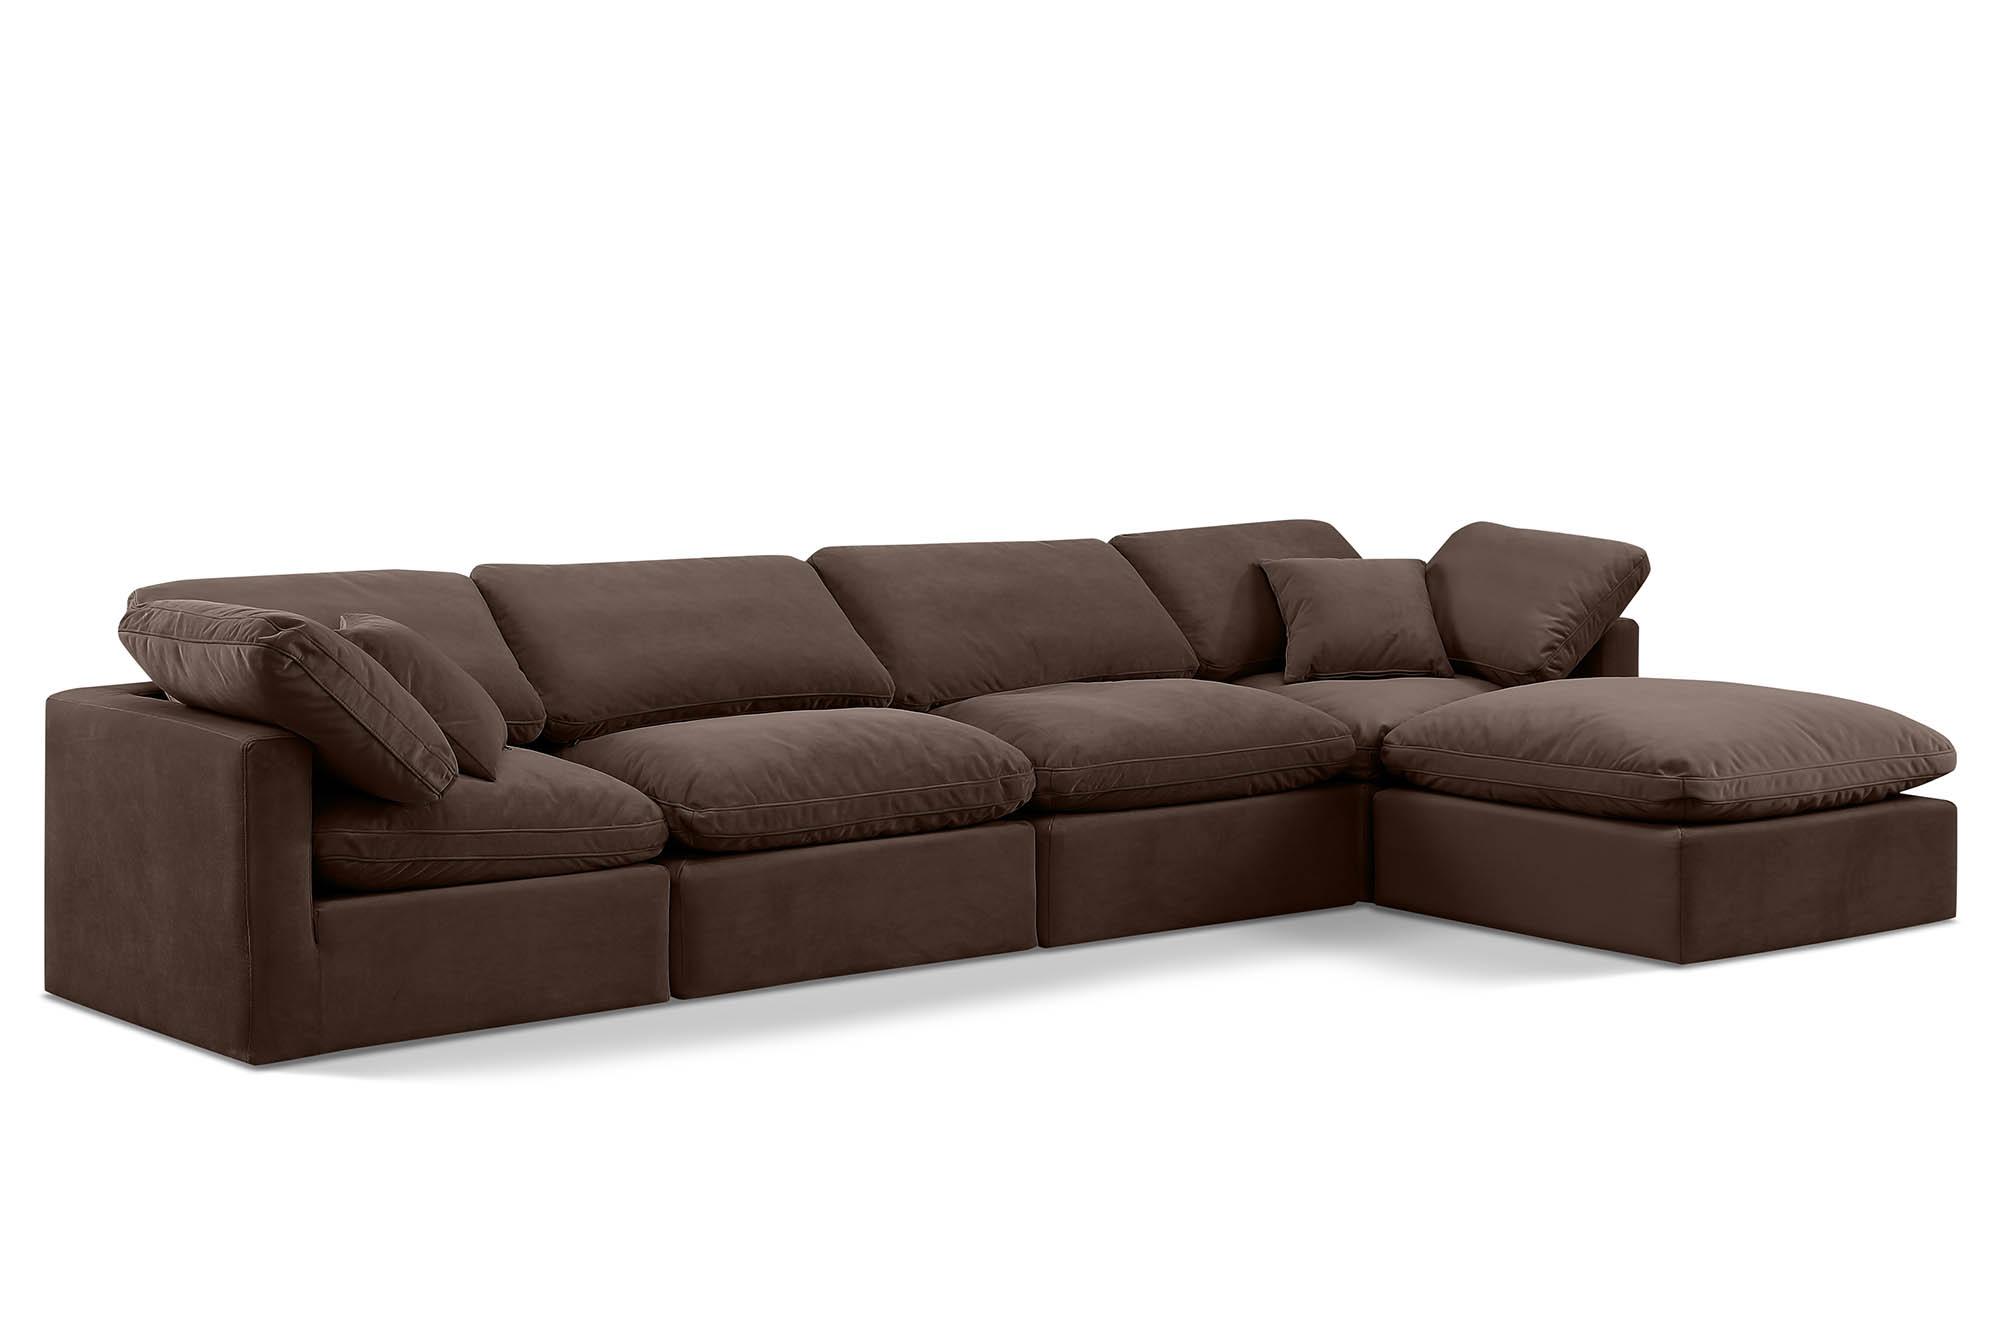 Contemporary, Modern Modular Sectional Sofa INDULGE 147Brown-Sec5A 147Brown-Sec5A in Brown Velvet